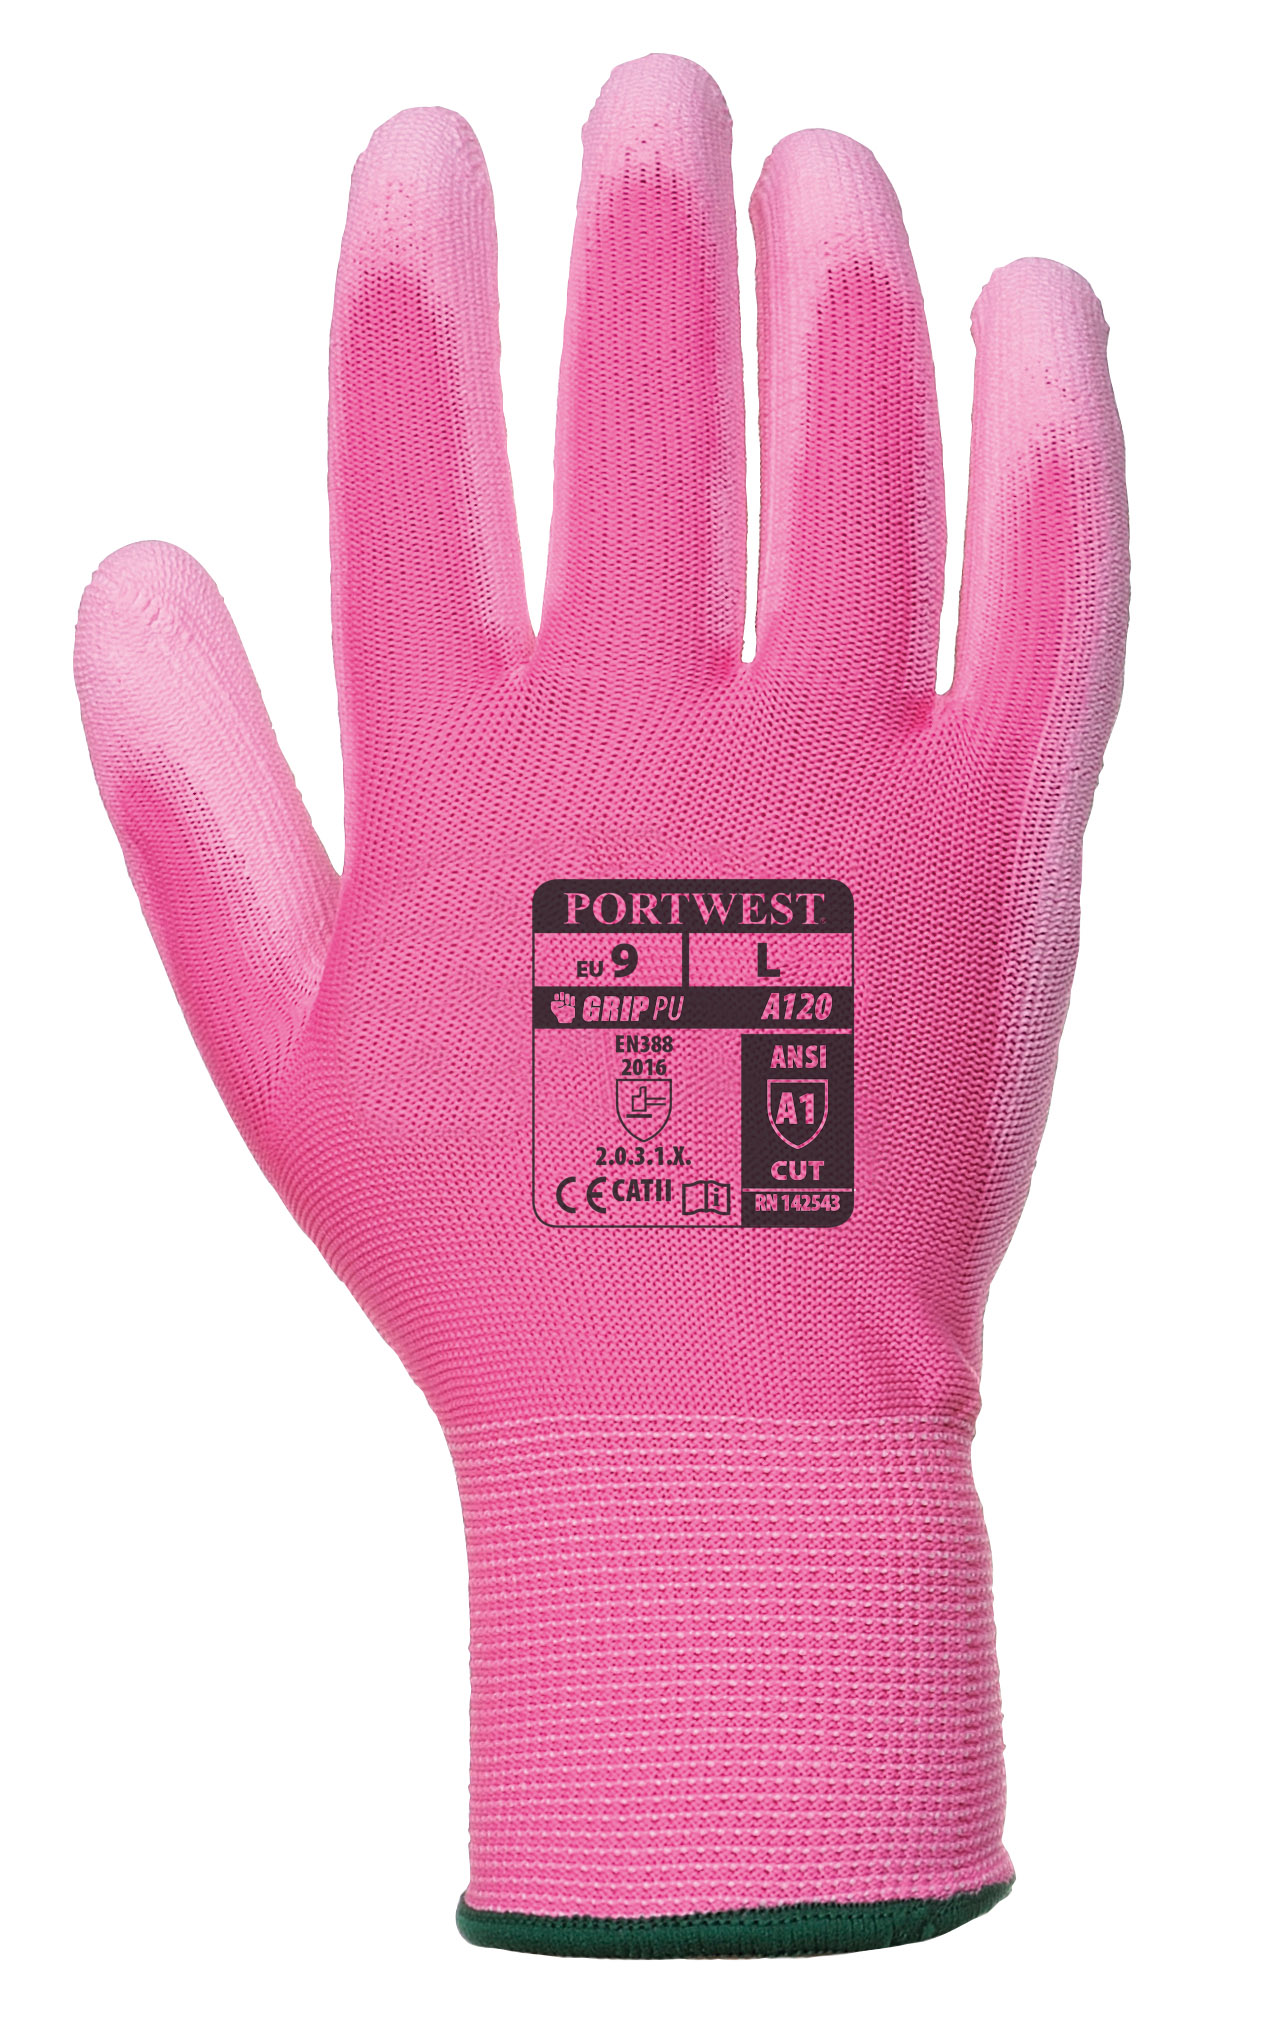 12 Pairs Portwest A120 Gloves PU Palm Work Cut Resistant ANSI 105 